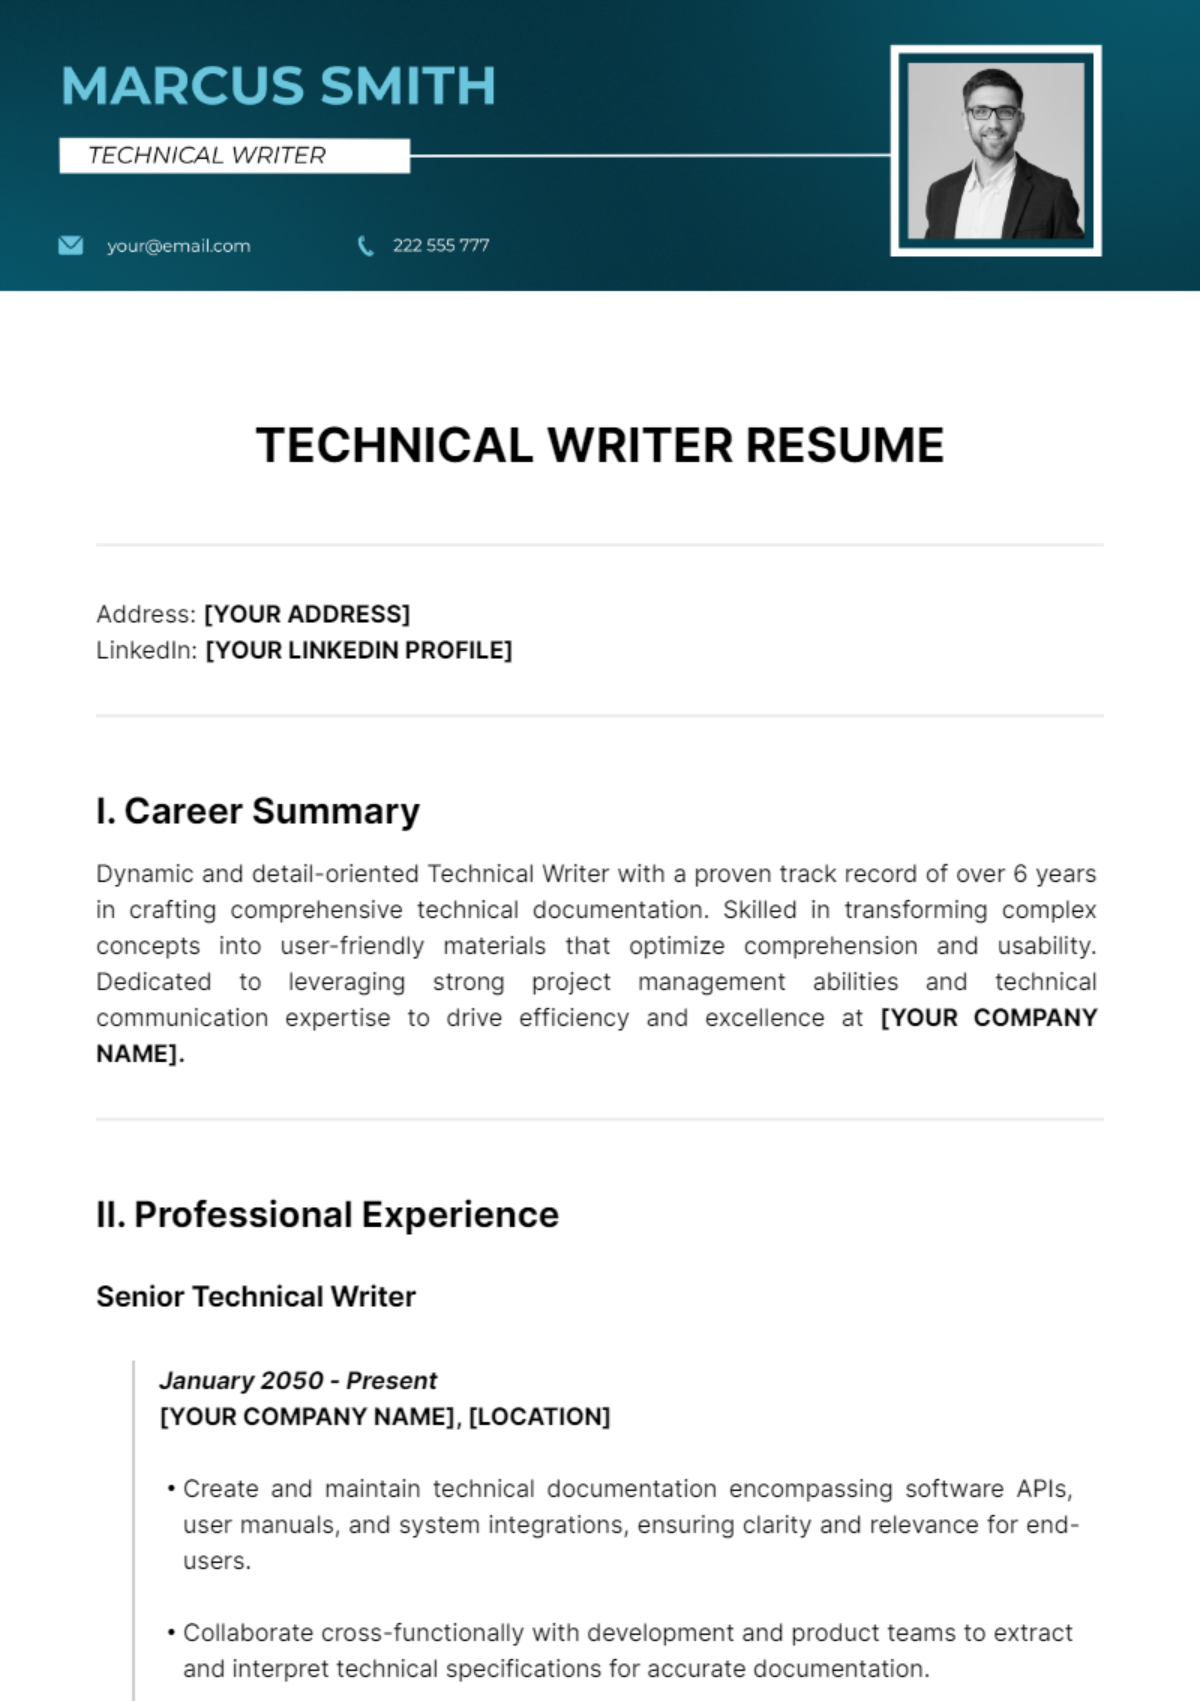 Technical Writer Resume Template